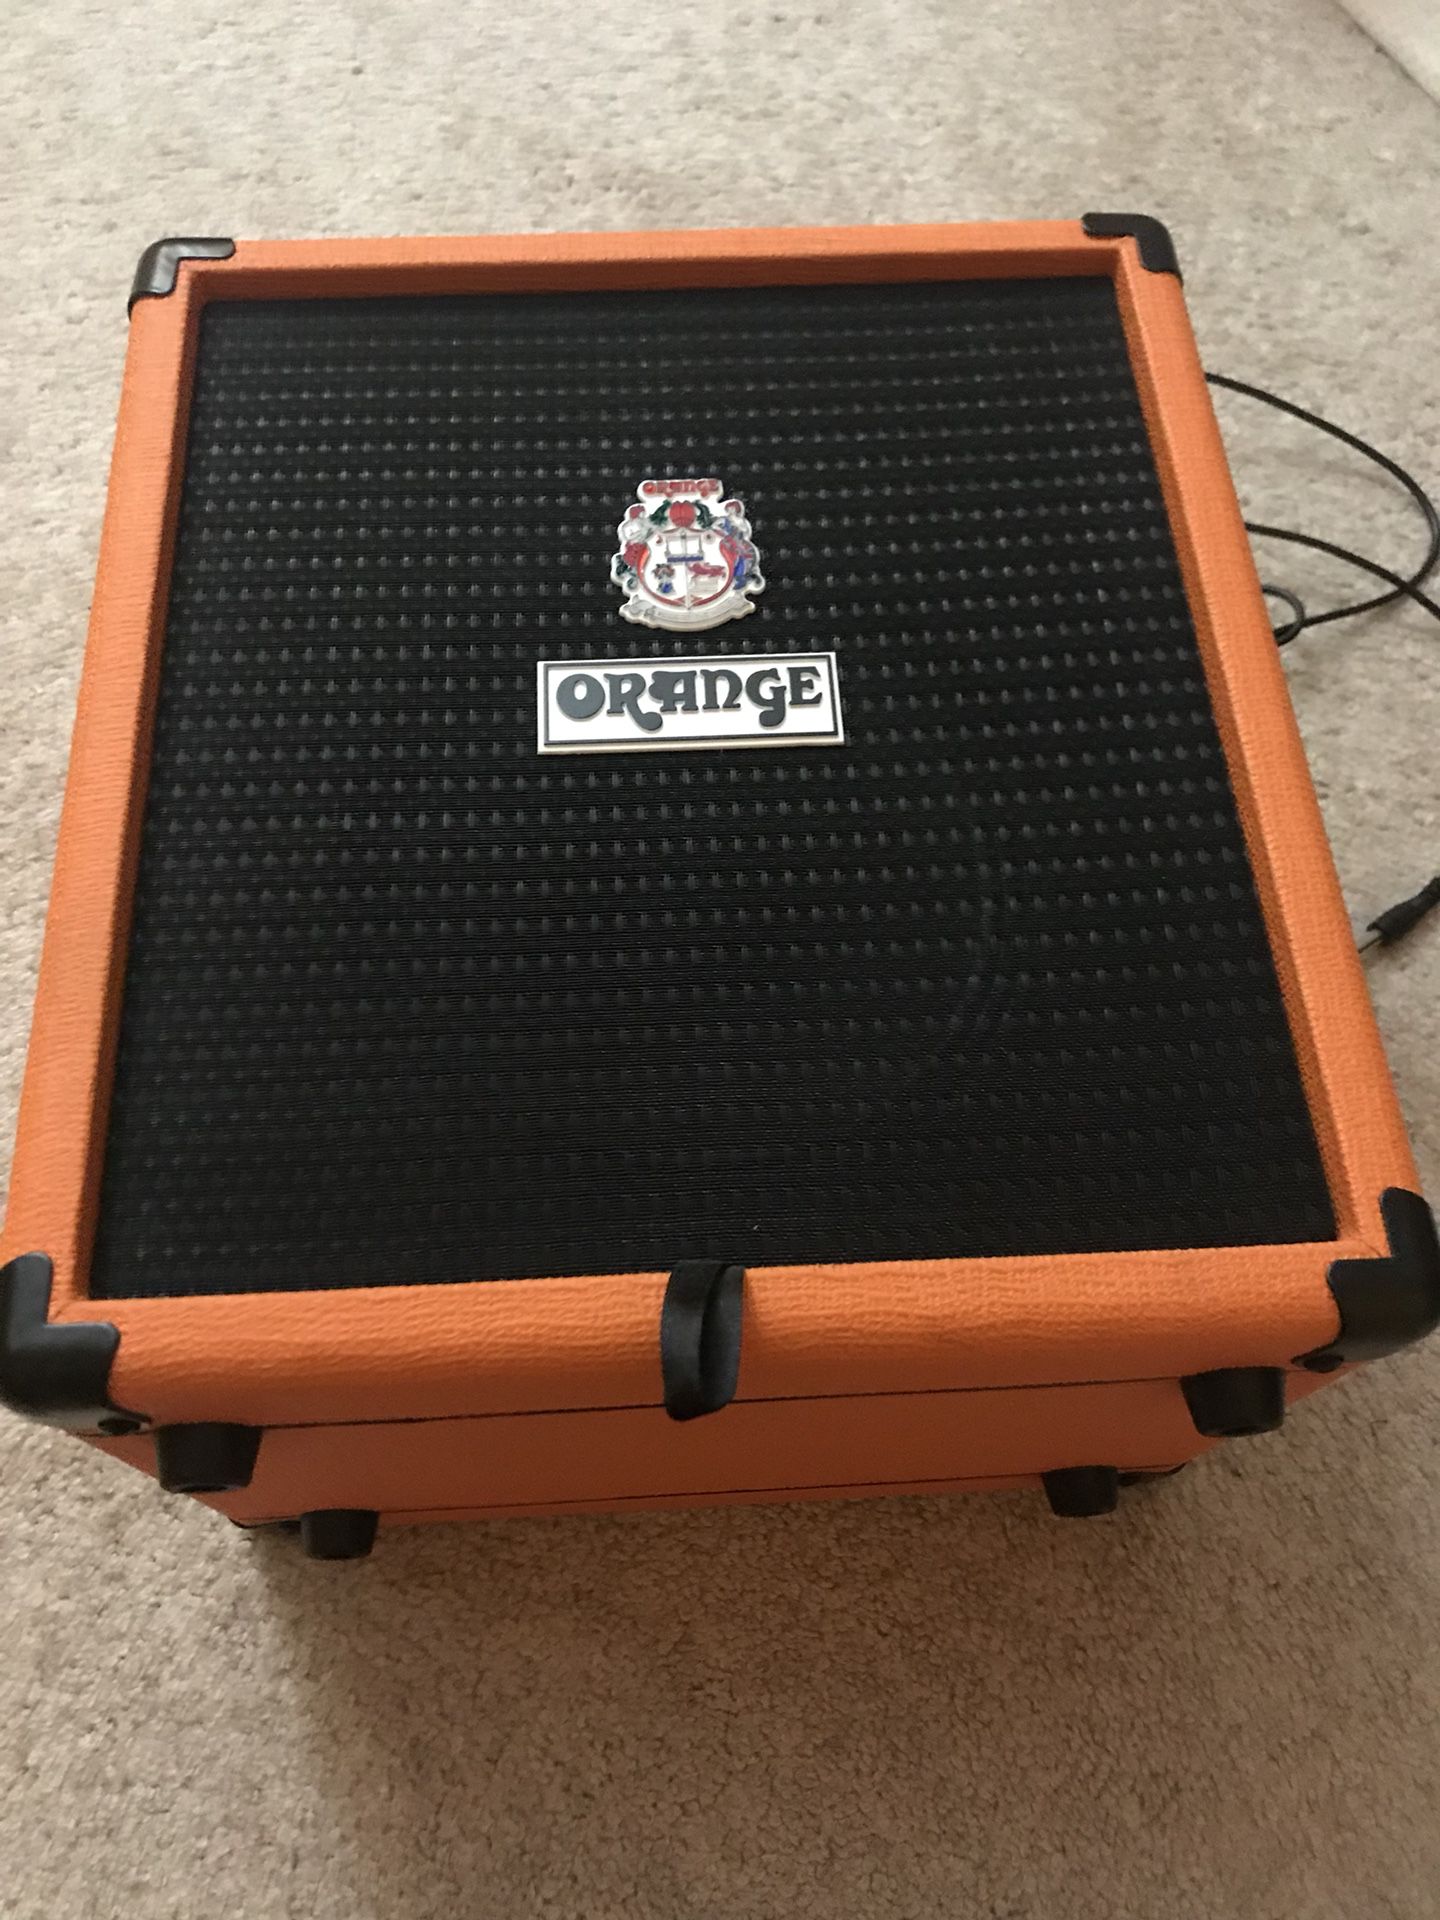 Orange Crush 25BX Amplifiers Guitar , Used good condition 25 watts .